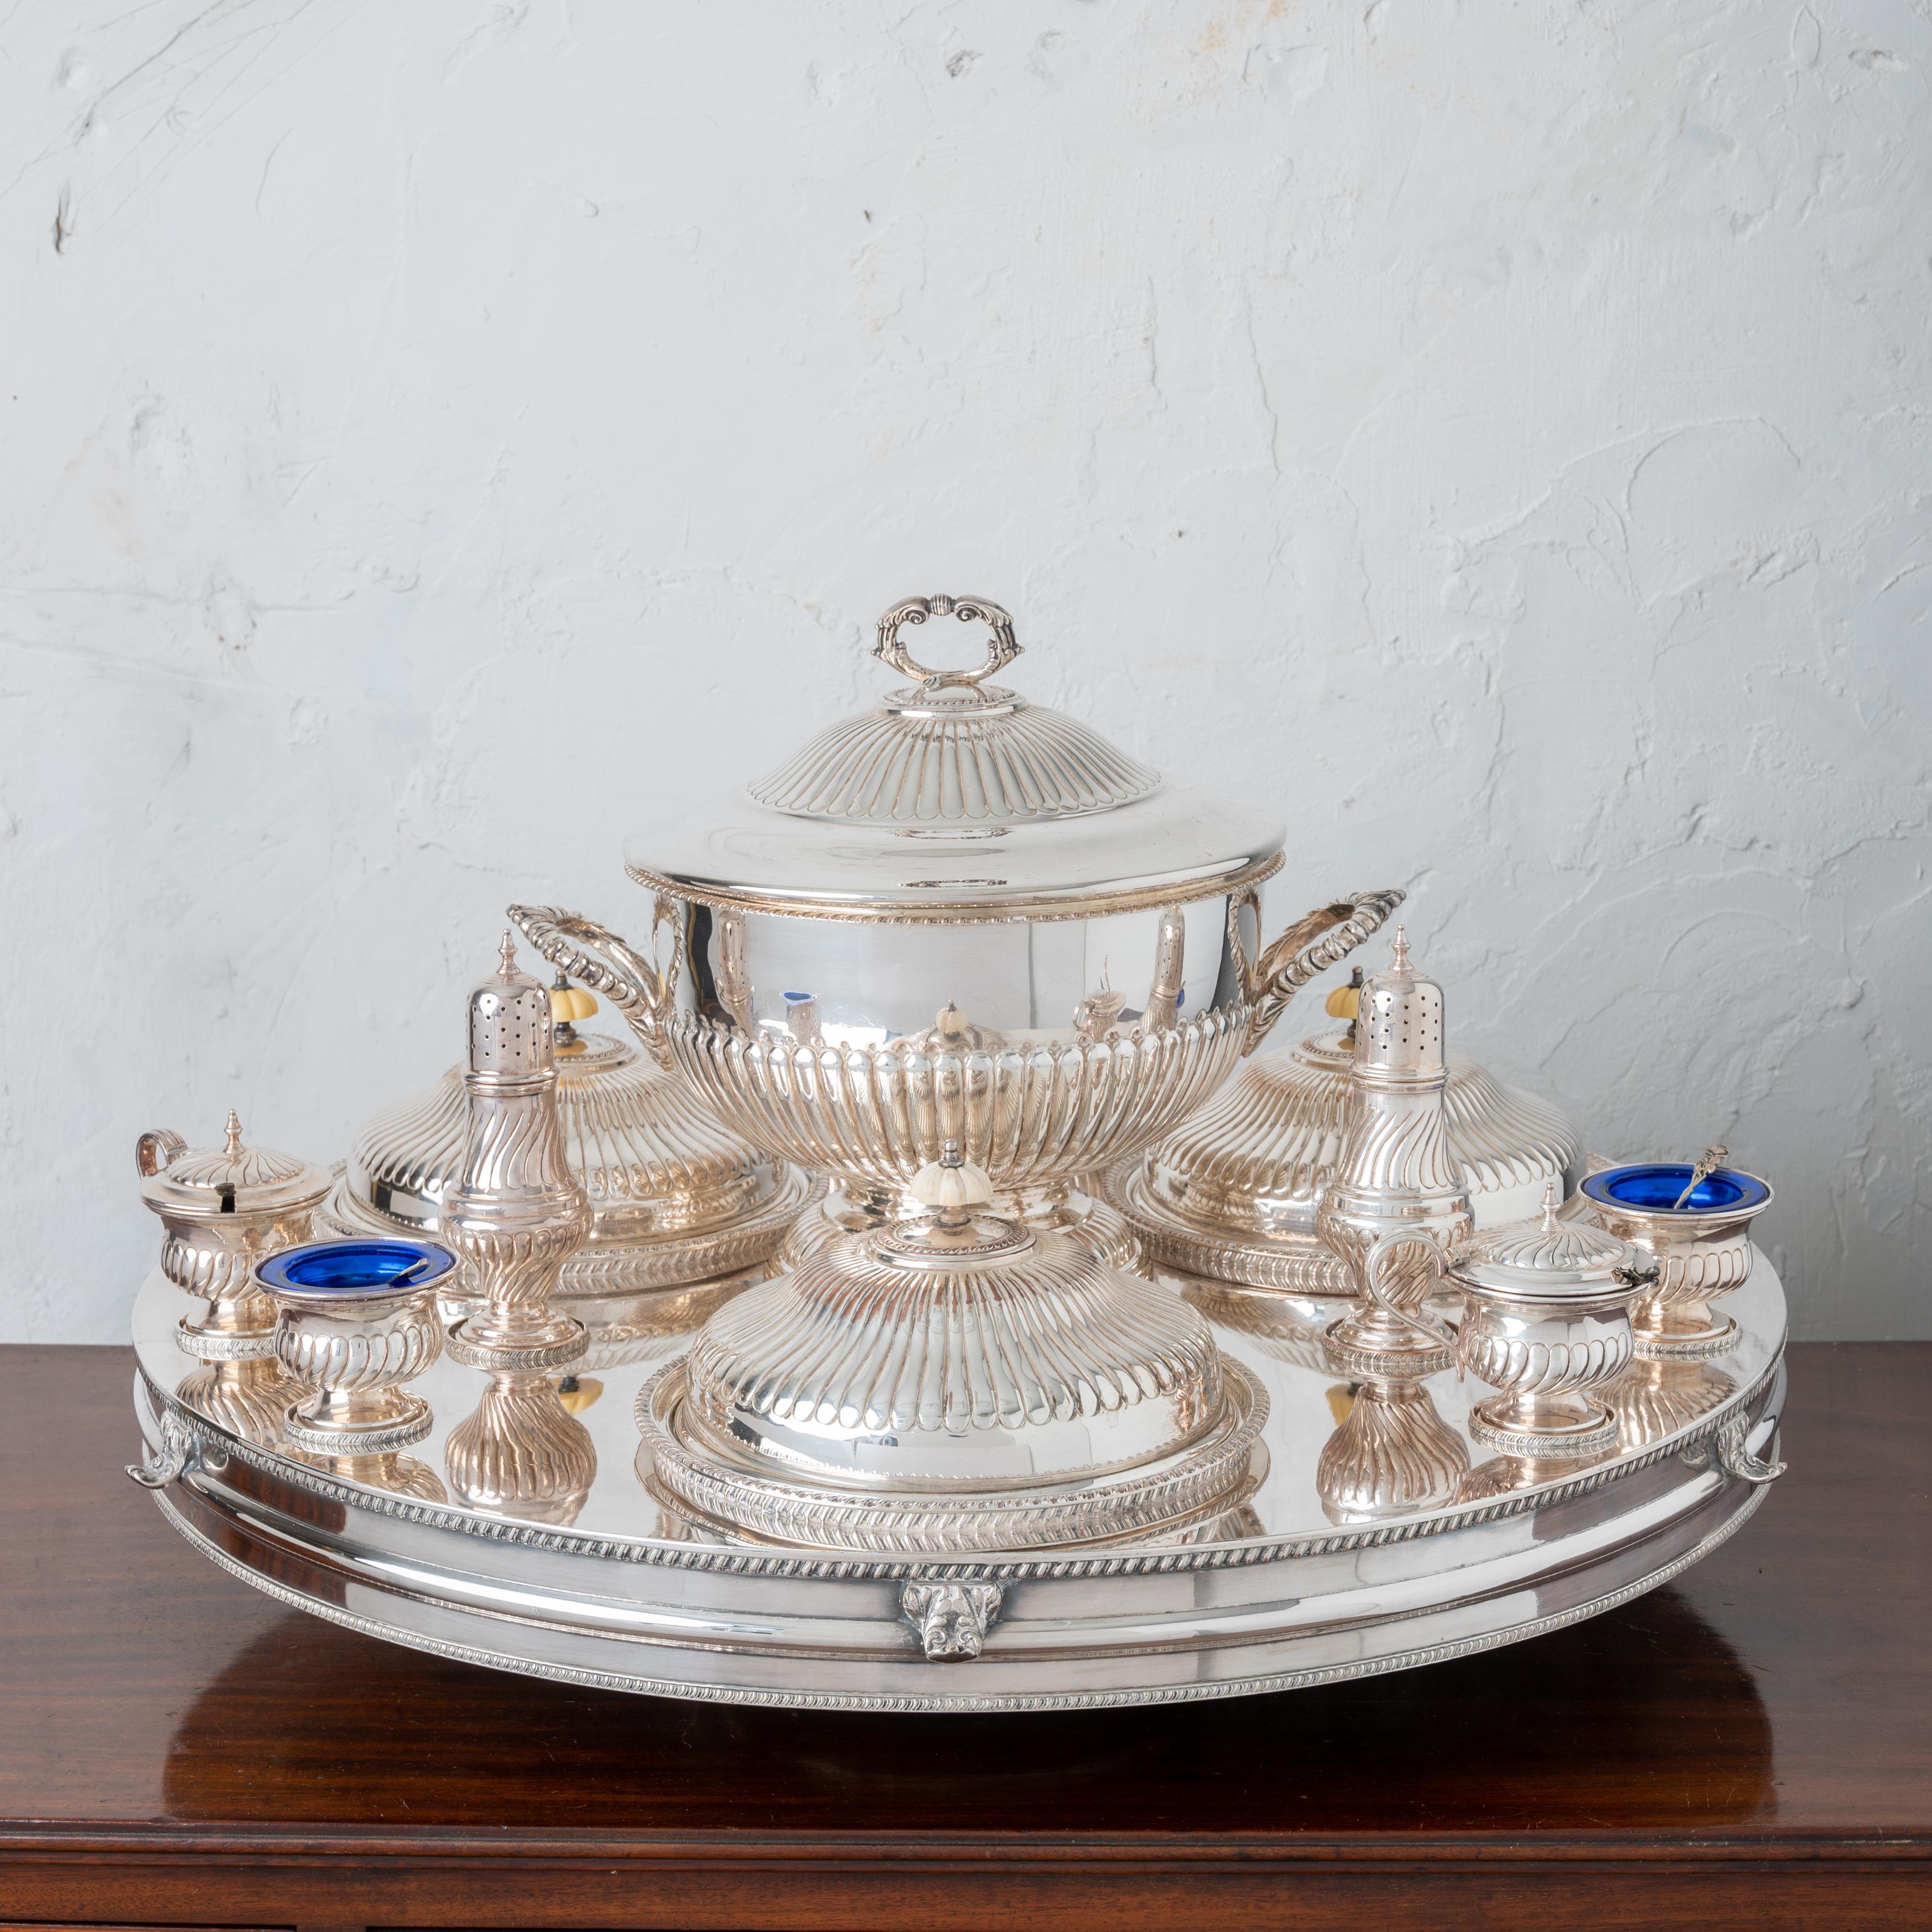 A Sheffield silverplate lazy susan server, circa 1920s

Edwardian style with large hot water tank base on heavy pedestal with thumb holds for turning.  A large lidded tureen in the center surrounded by three covered warming dishes submerged into